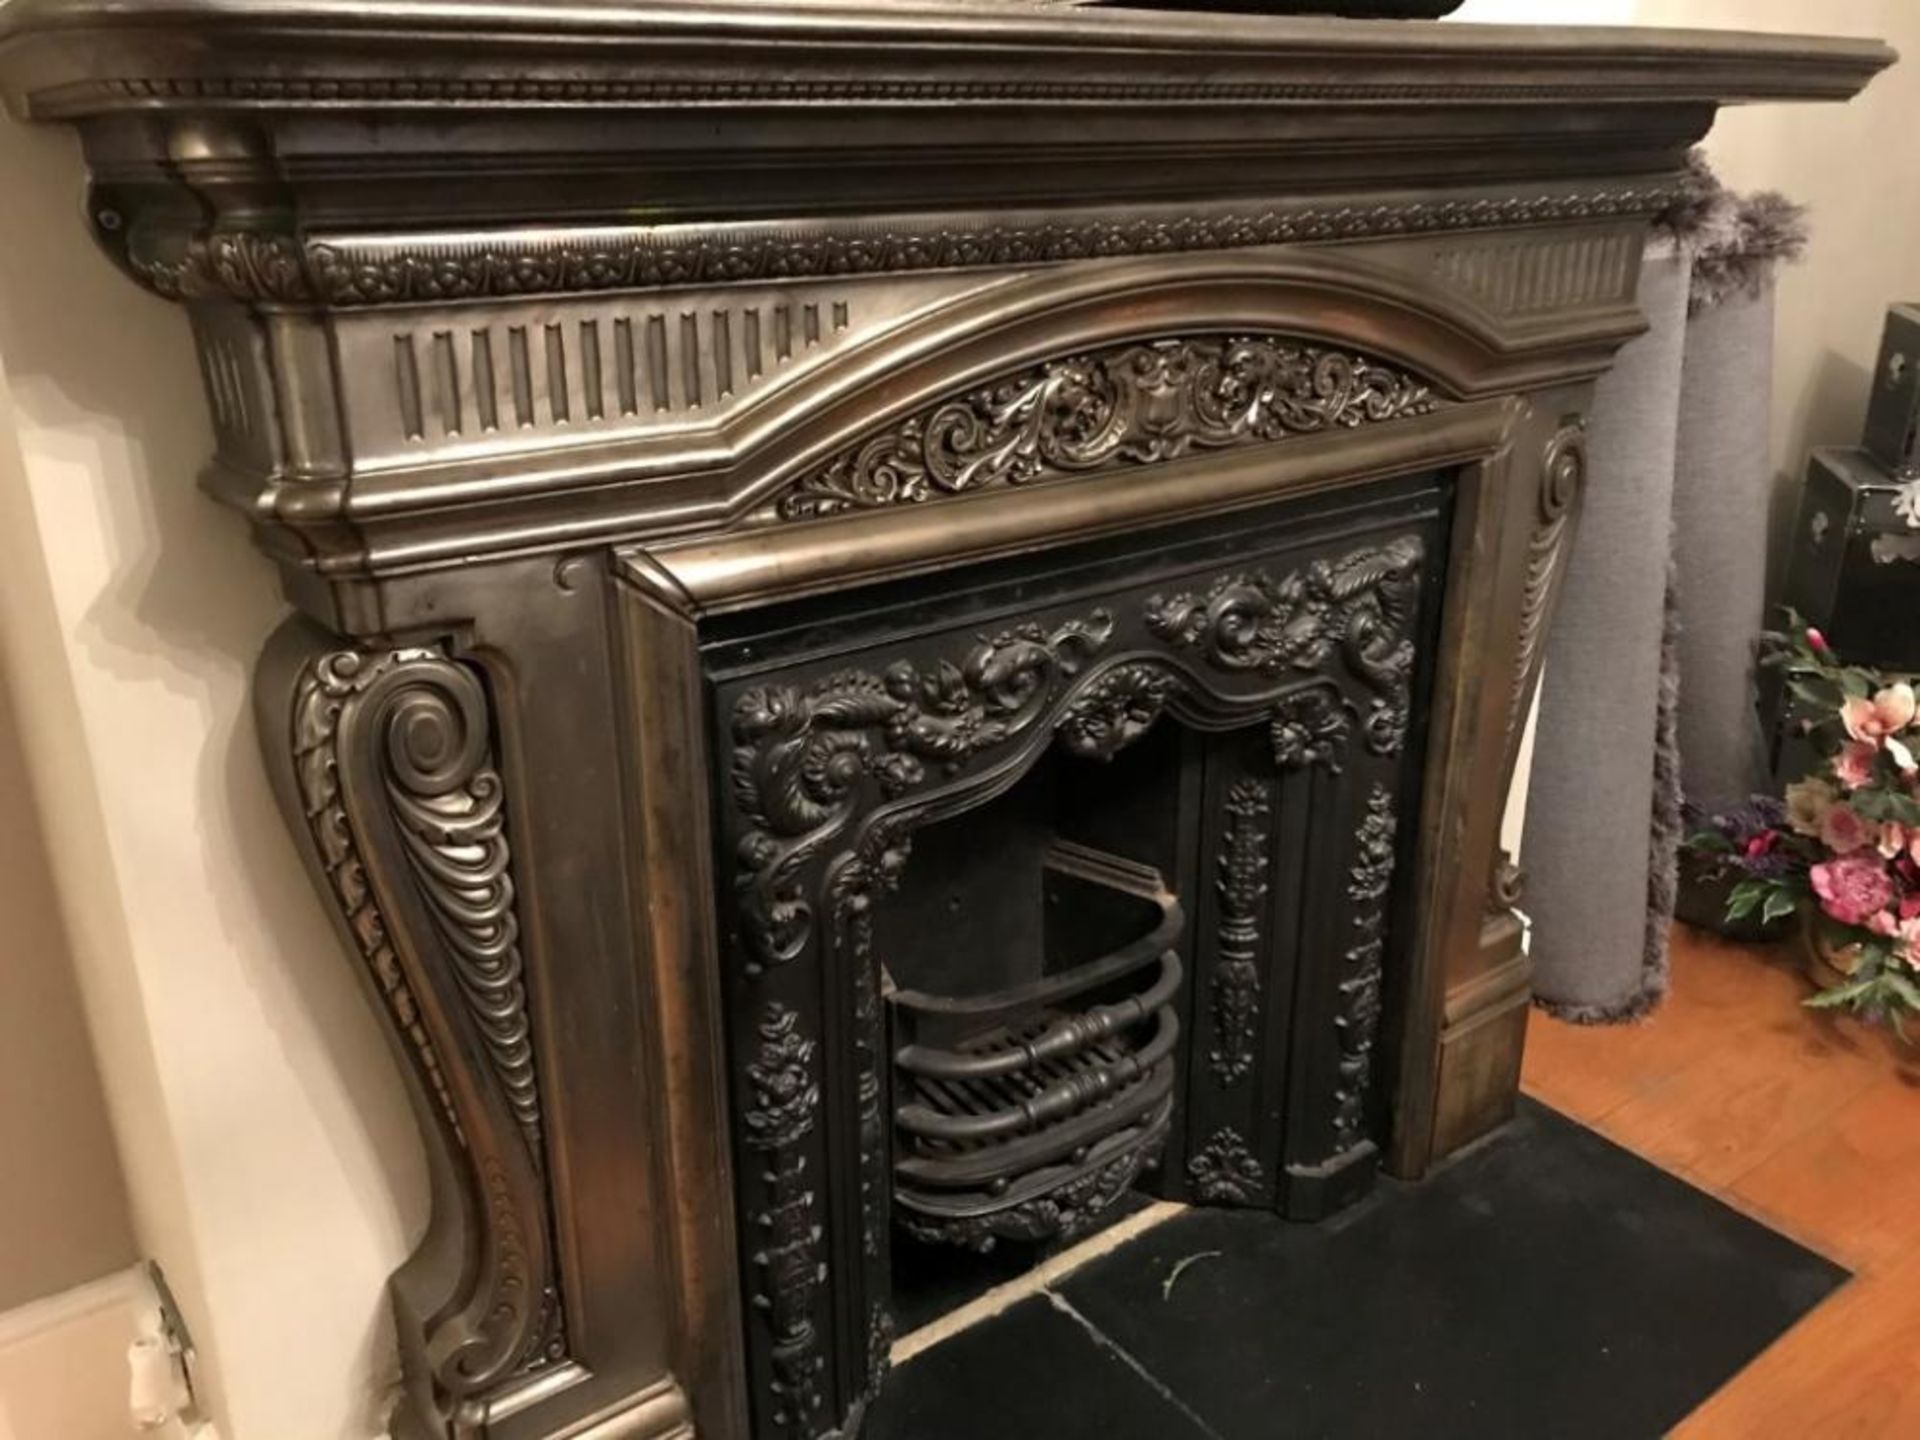 1 x Ultra Rare Antique Victorian Cast Iron Fireplace Ornamental Detail Surrounding And Insert - - Image 18 of 20